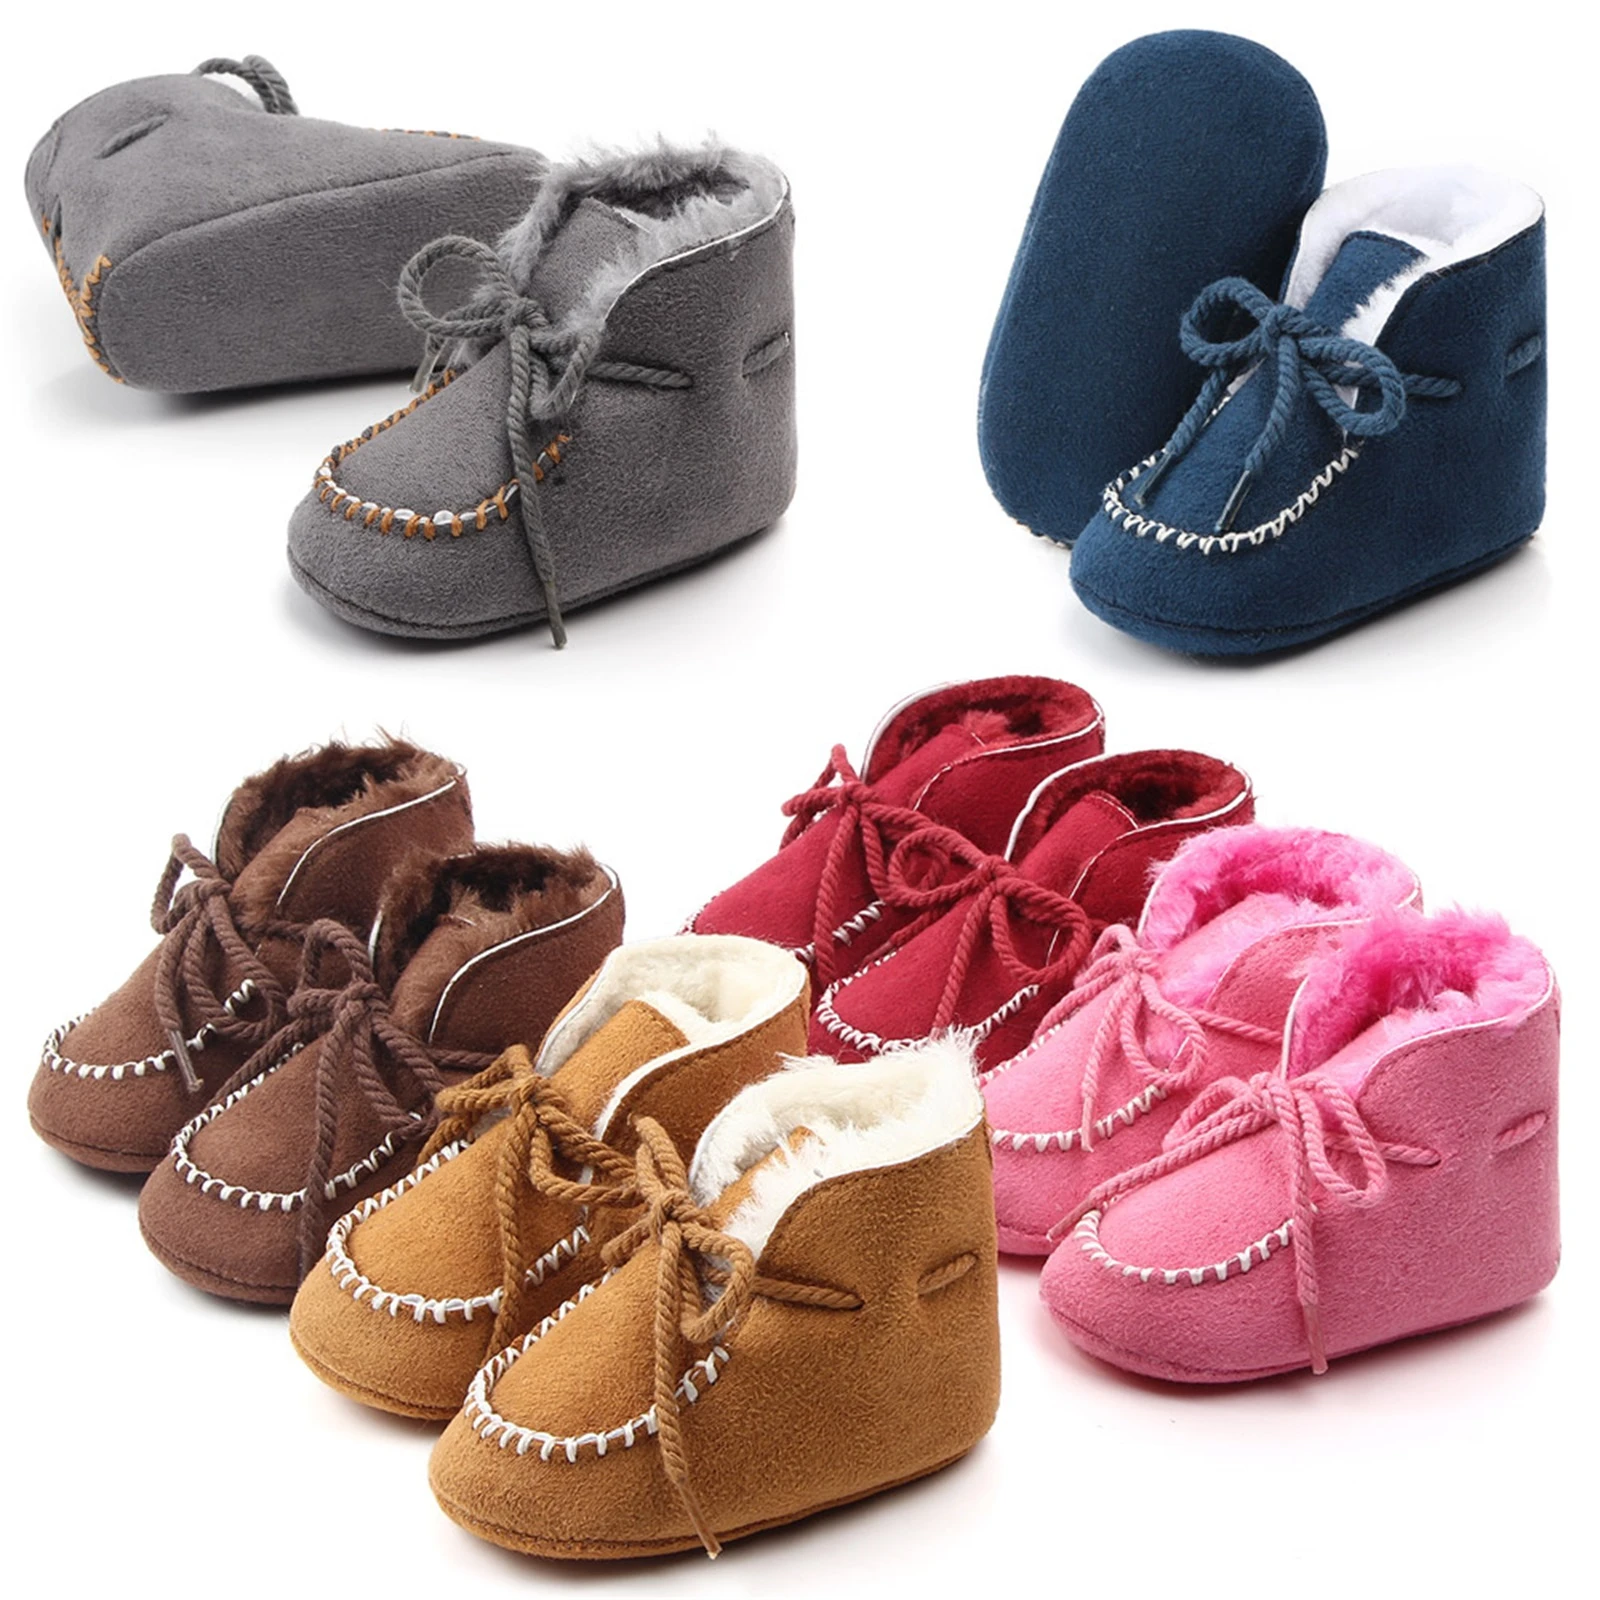 Adjustable Winter Boots | Non-slip Shoes - Newborn Baby Boots - Aliexpress